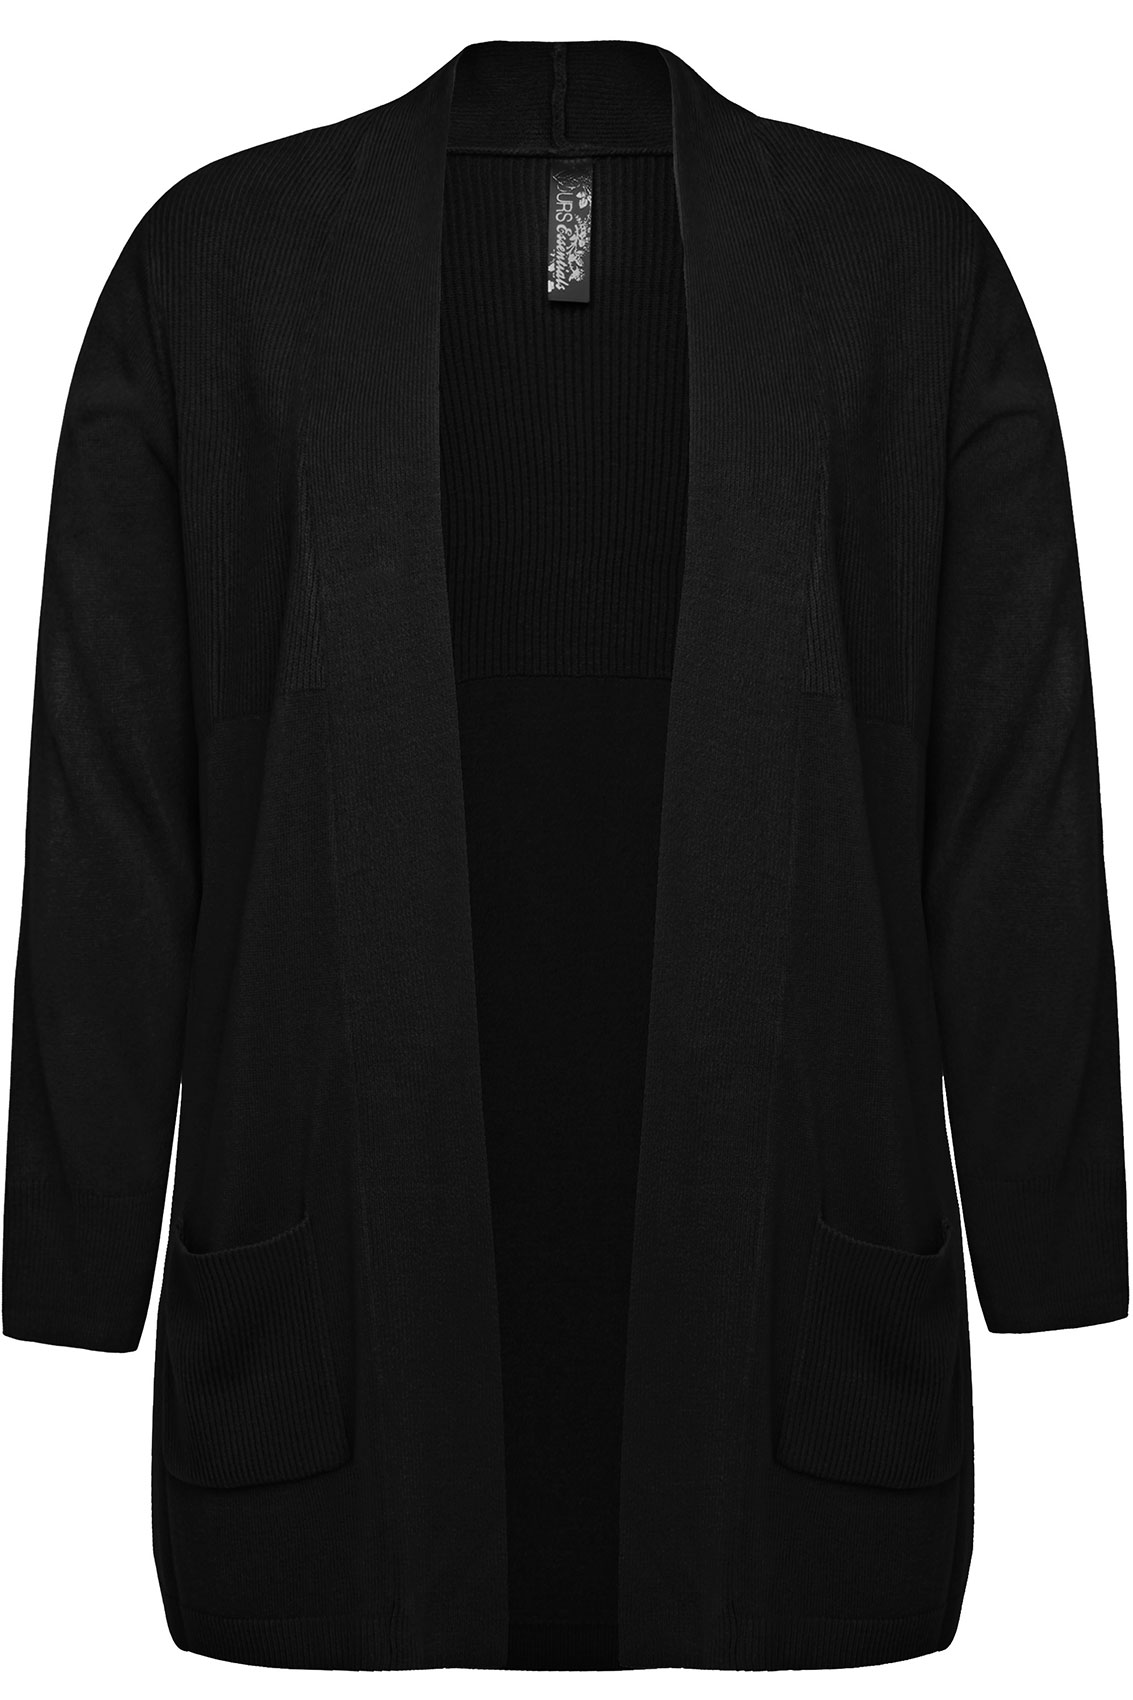 Black Edge to Edge Supersoft Knitted Cardigan With Pockets & Ribbing ...